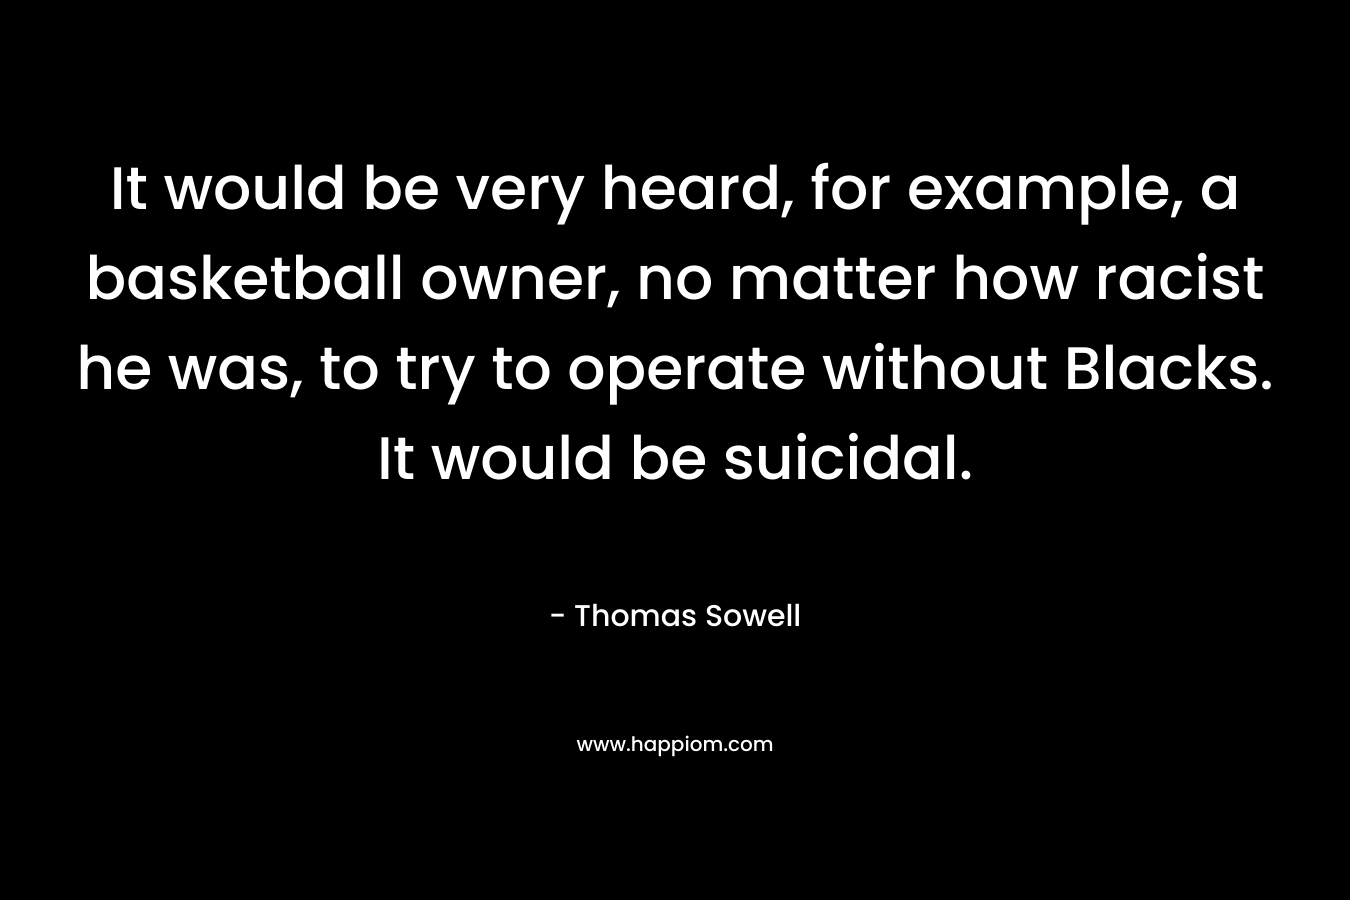 It would be very heard, for example, a basketball owner, no matter how racist he was, to try to operate without Blacks. It would be suicidal.